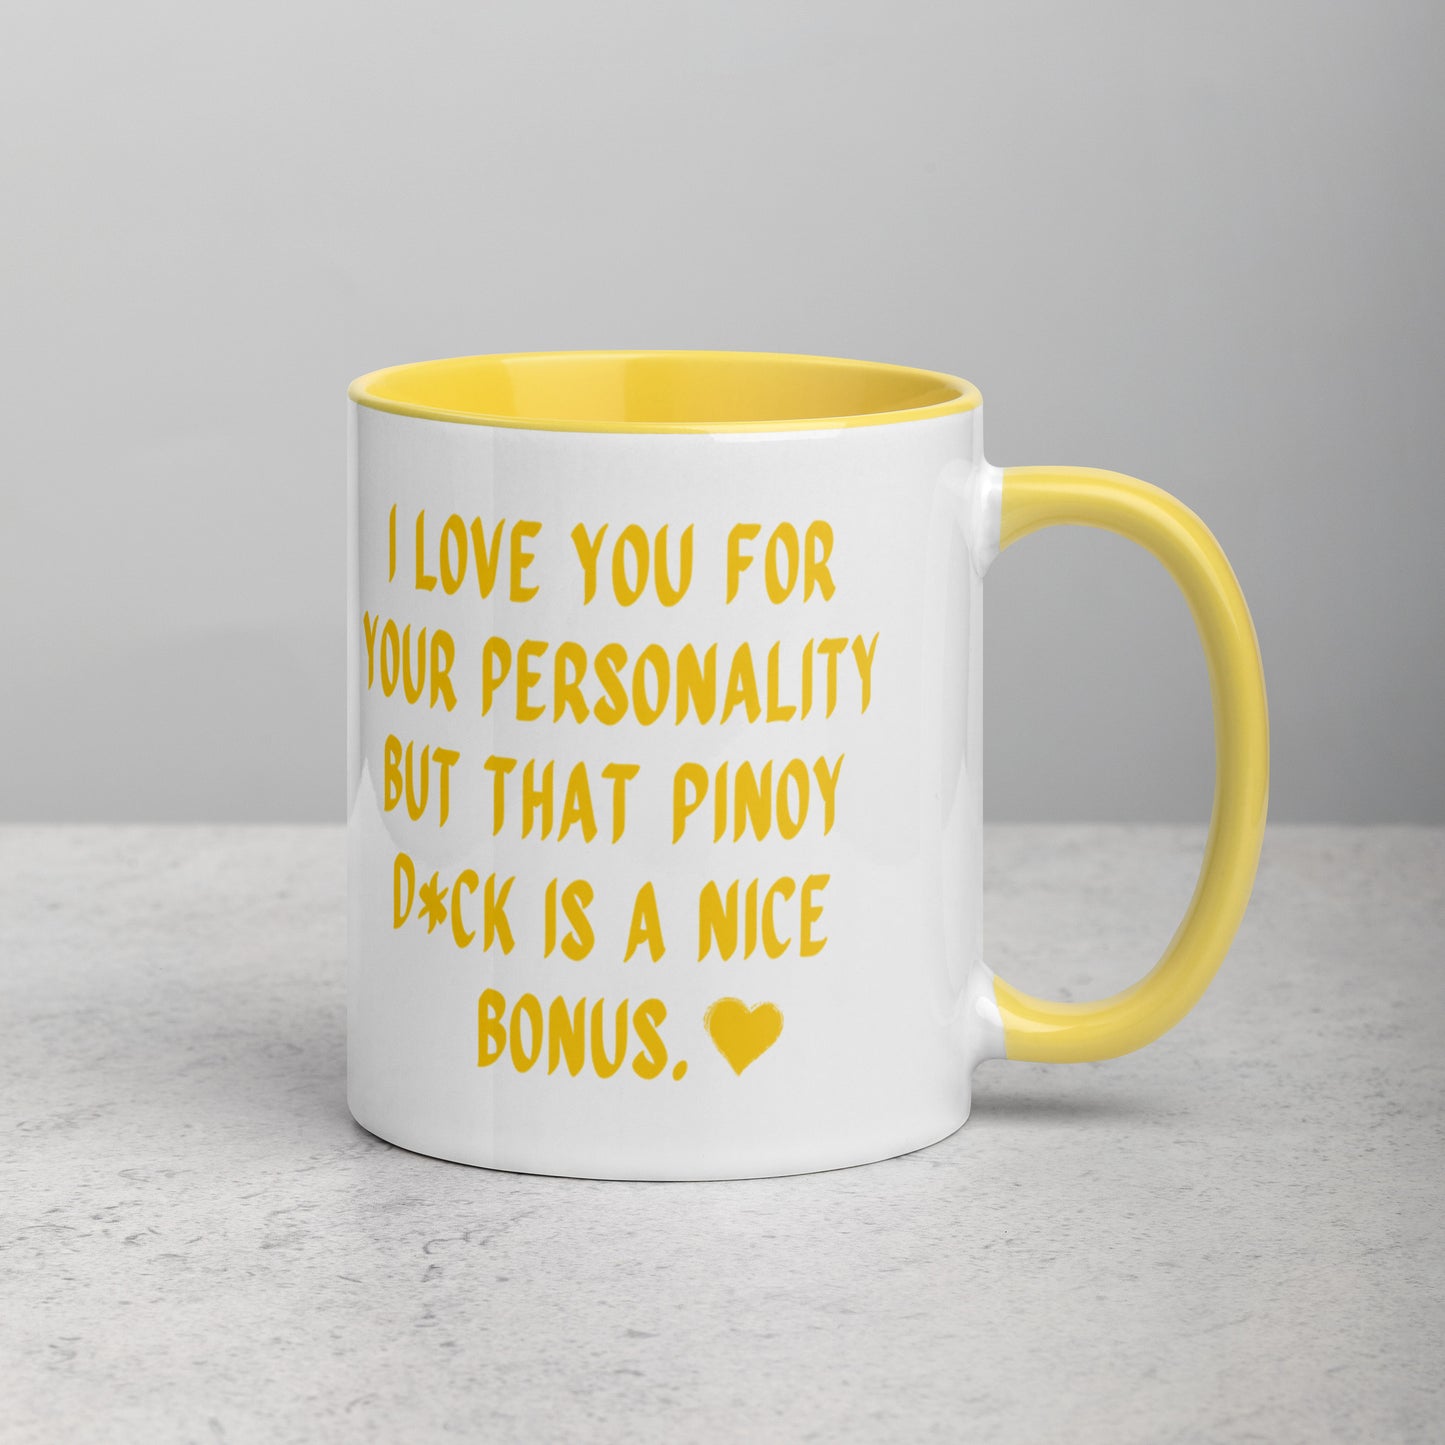 I Love You For Your Personality Funny Pinoy Valentine's Day Mug in color variant Yellow.